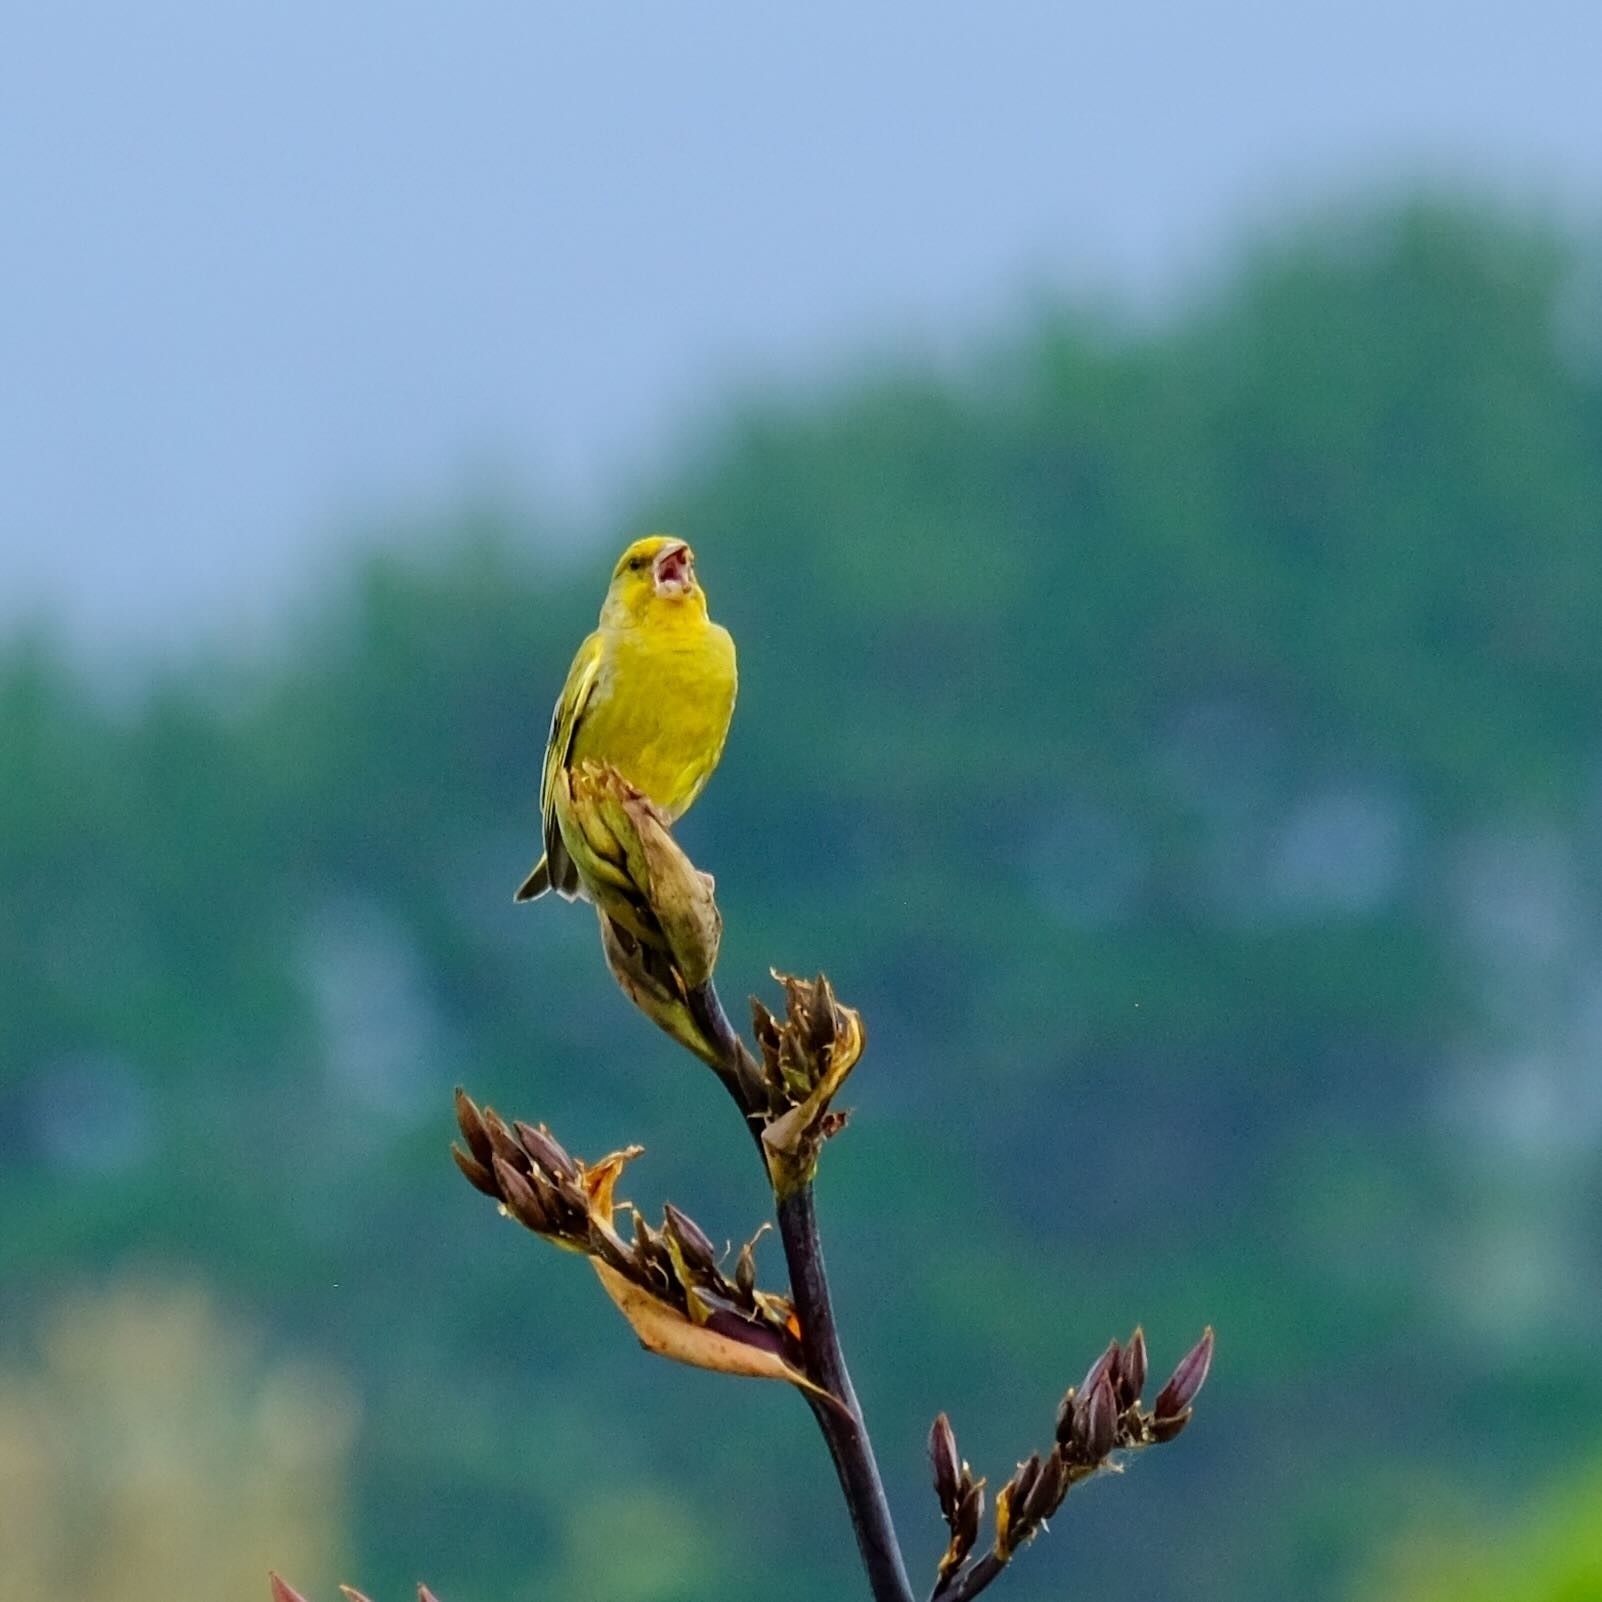 Small yellow bird, singing, on a flax spear.